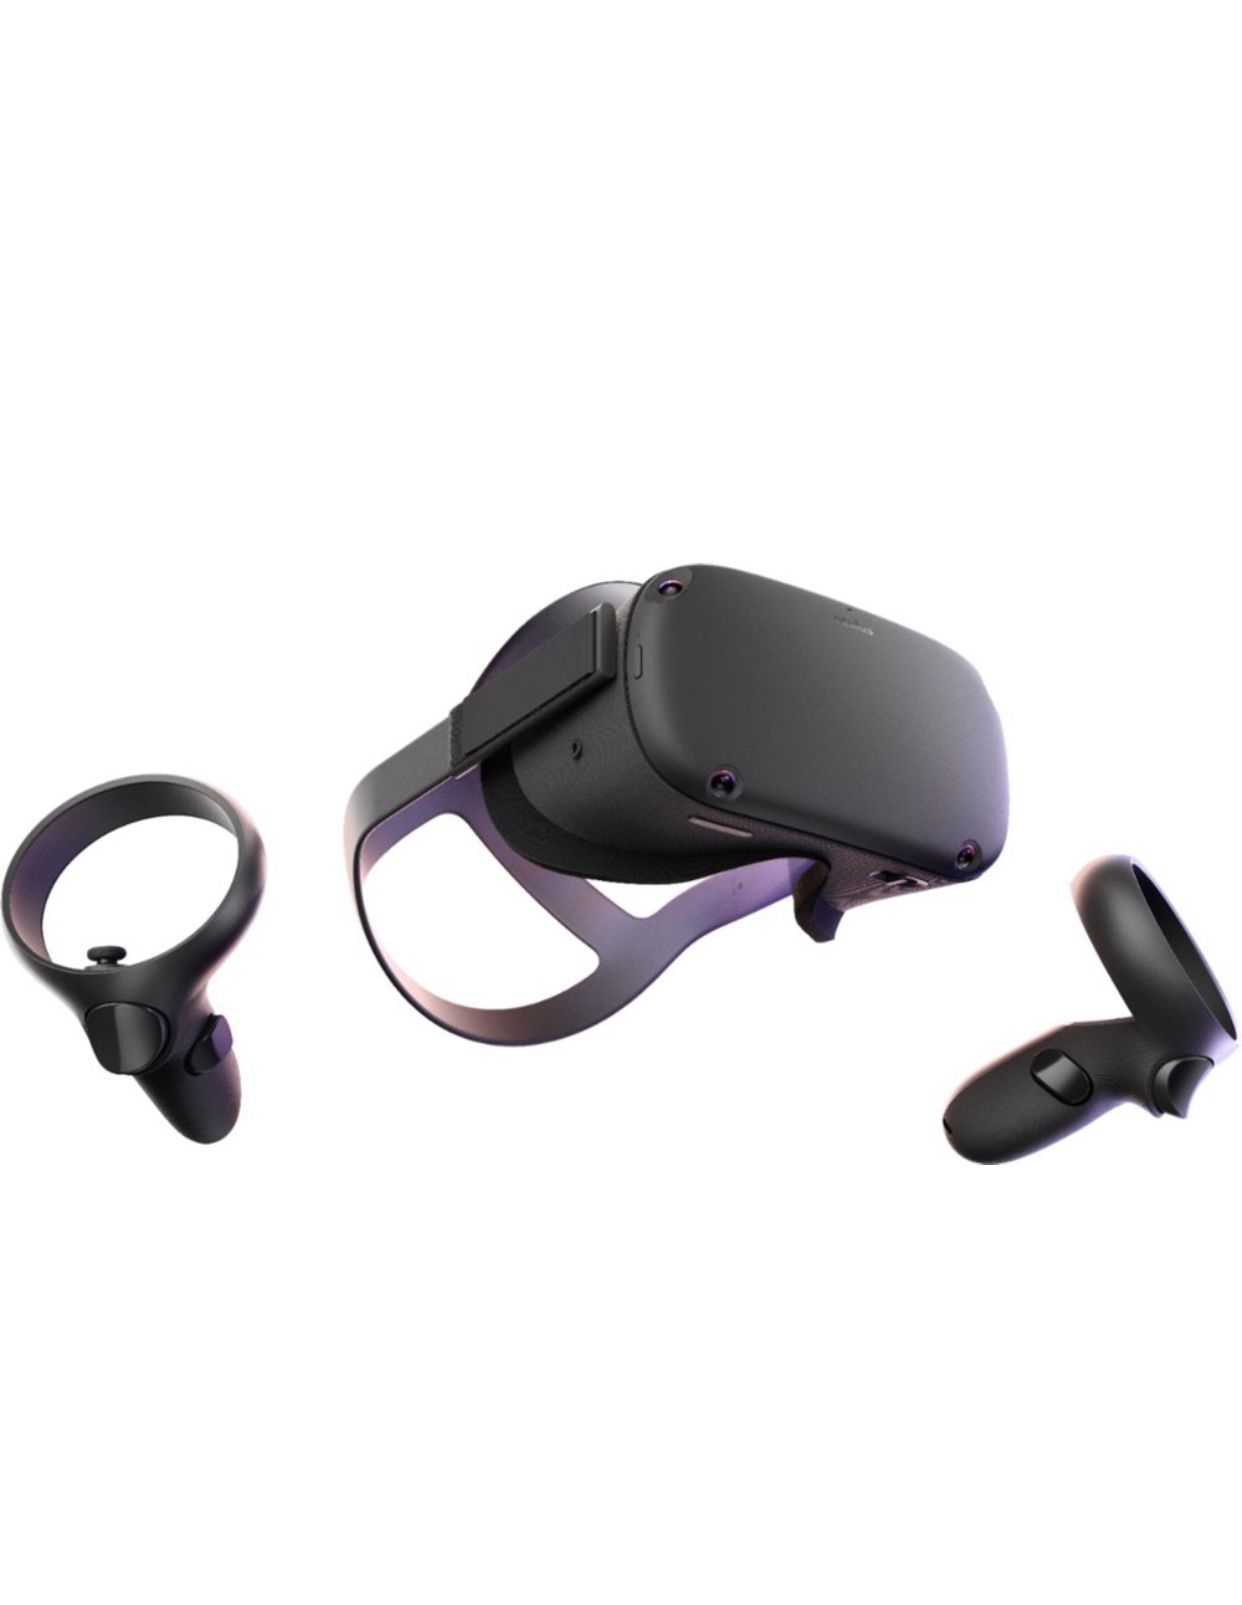 Oculus - Quest All-in-one VR Gaming Headset - 64GB - Black